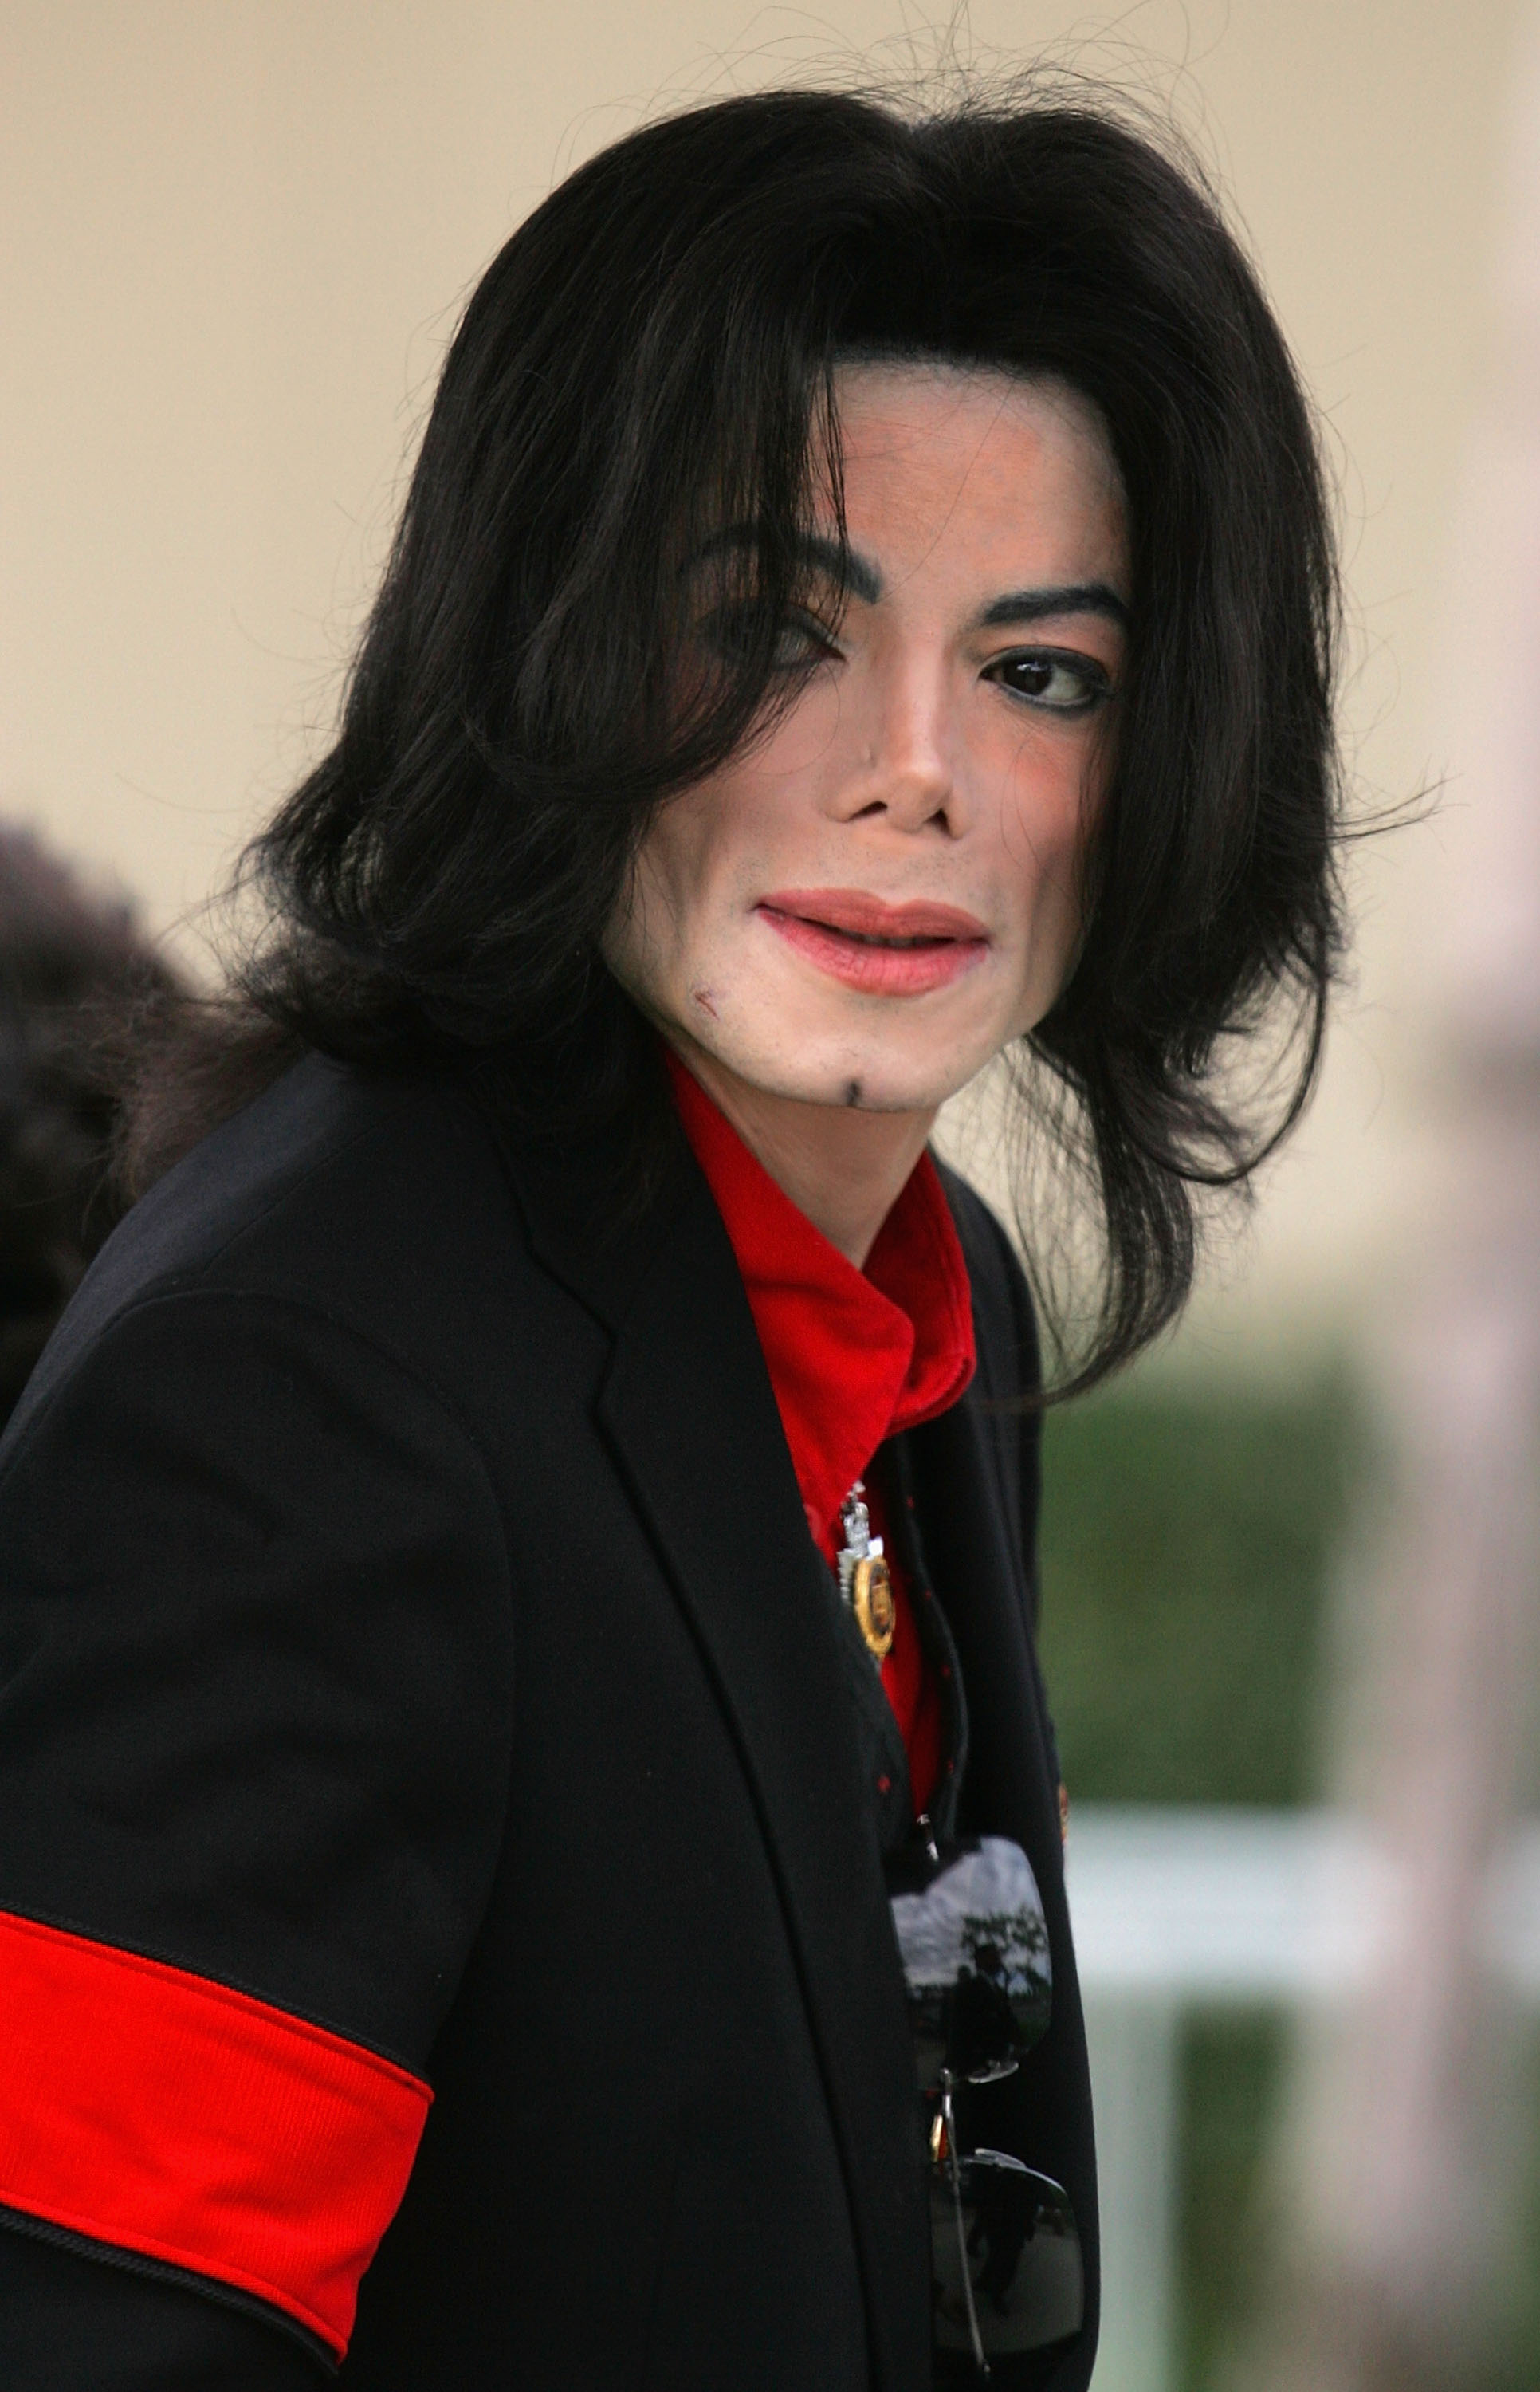 Michael Jackson on the 19th day of his child abuse trial in Santa Maria, 2005 | Source: Getty Images